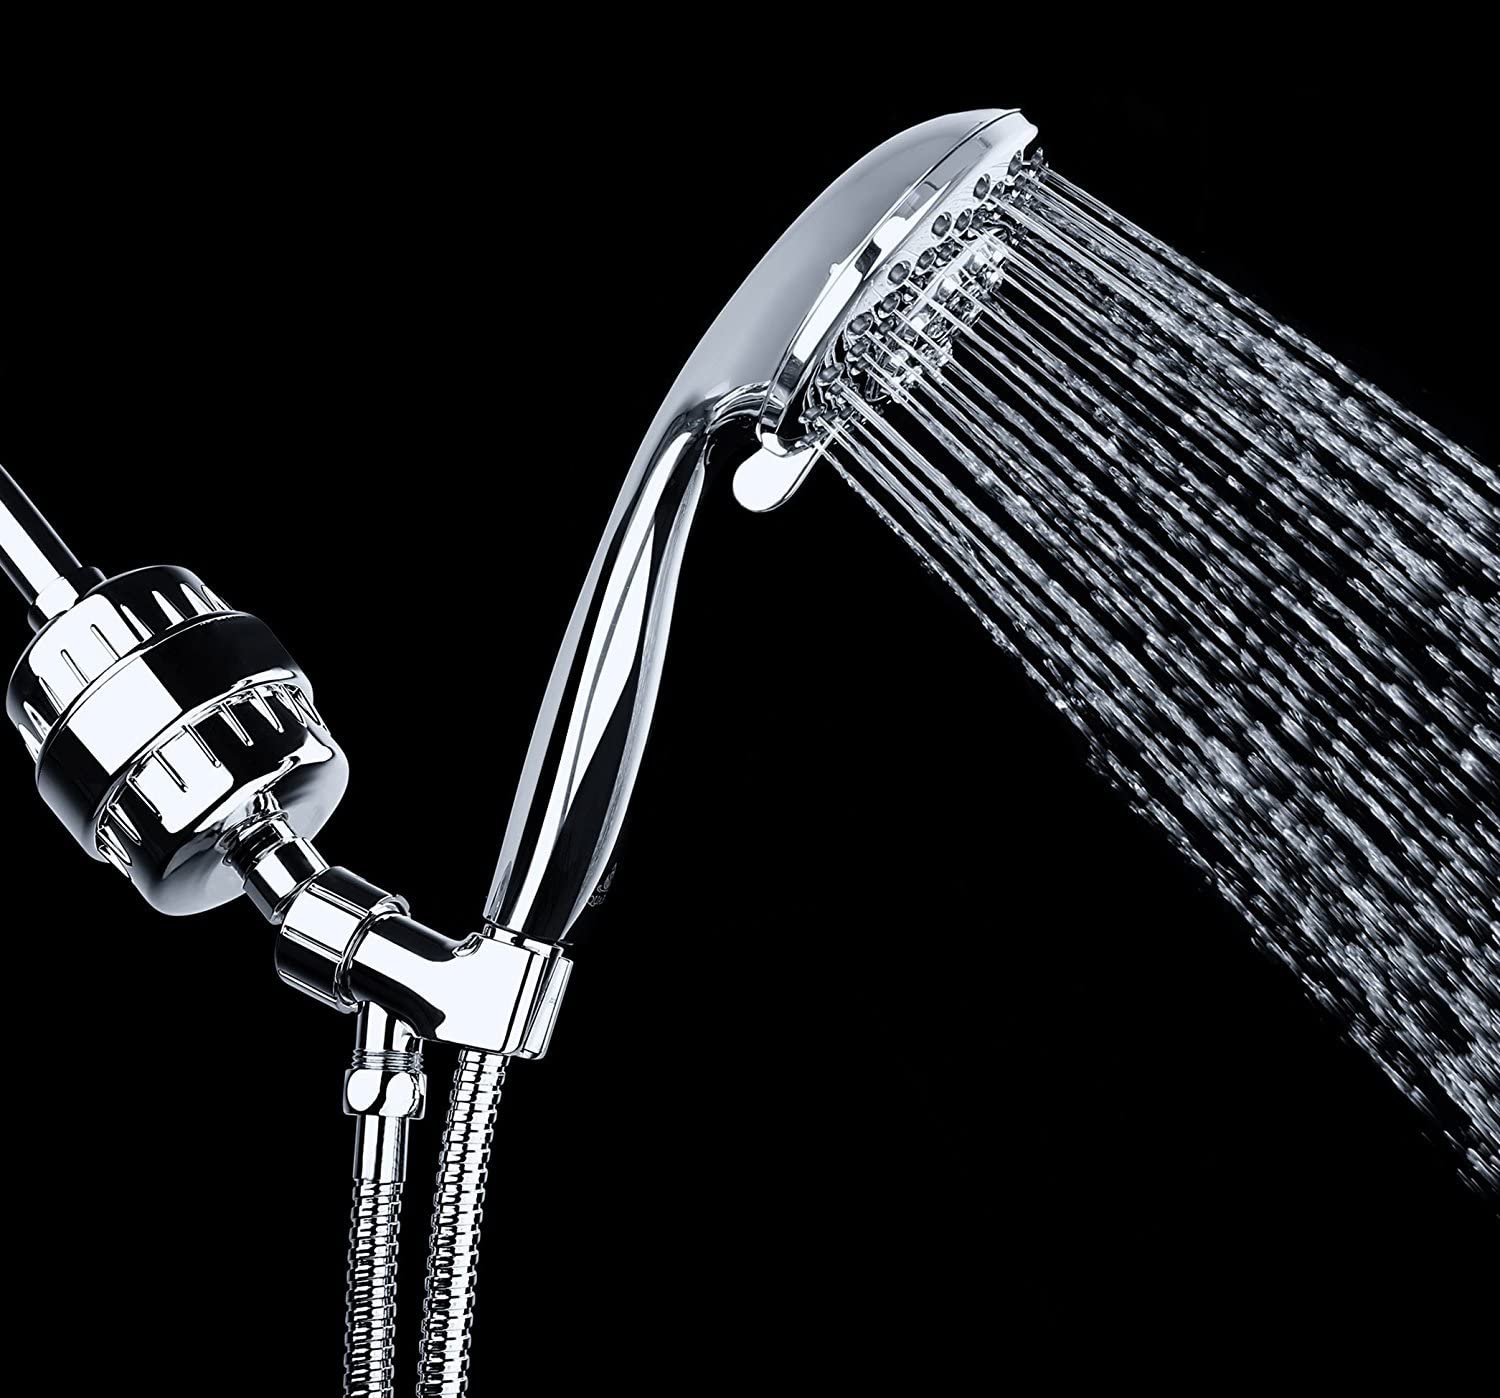 Where To Buy Shower Filter